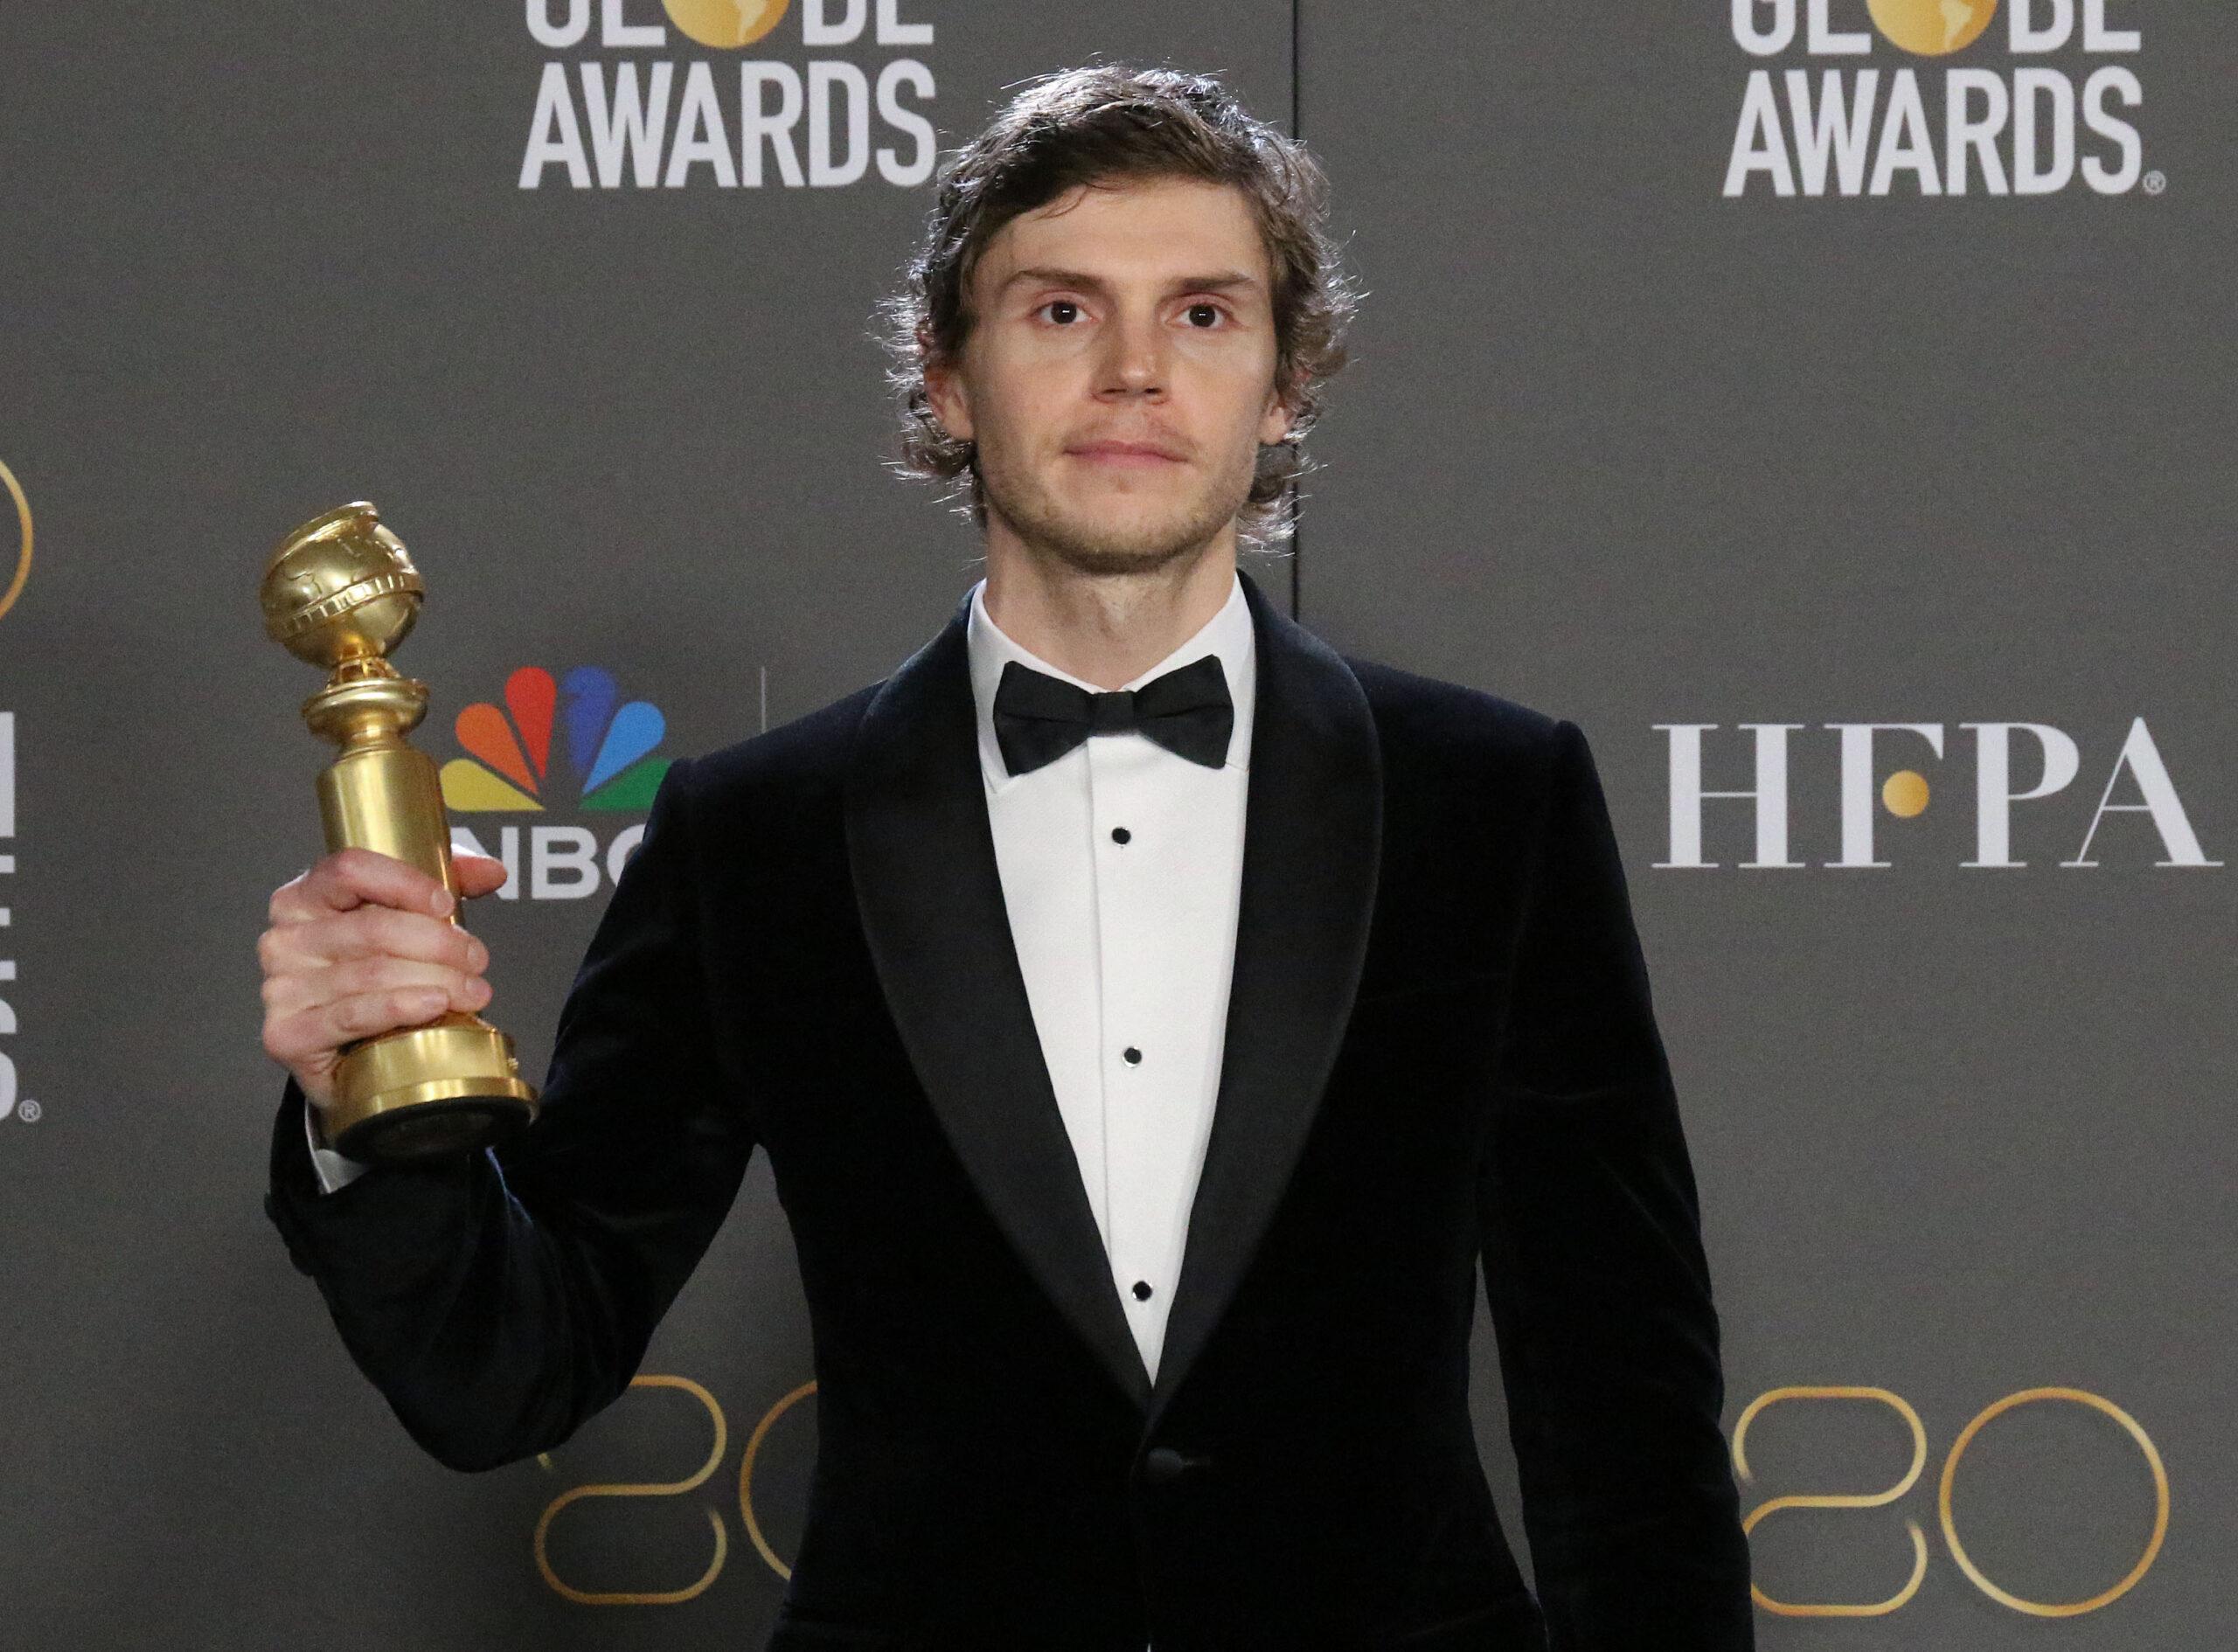 Evan Peters holding a Golden Globe